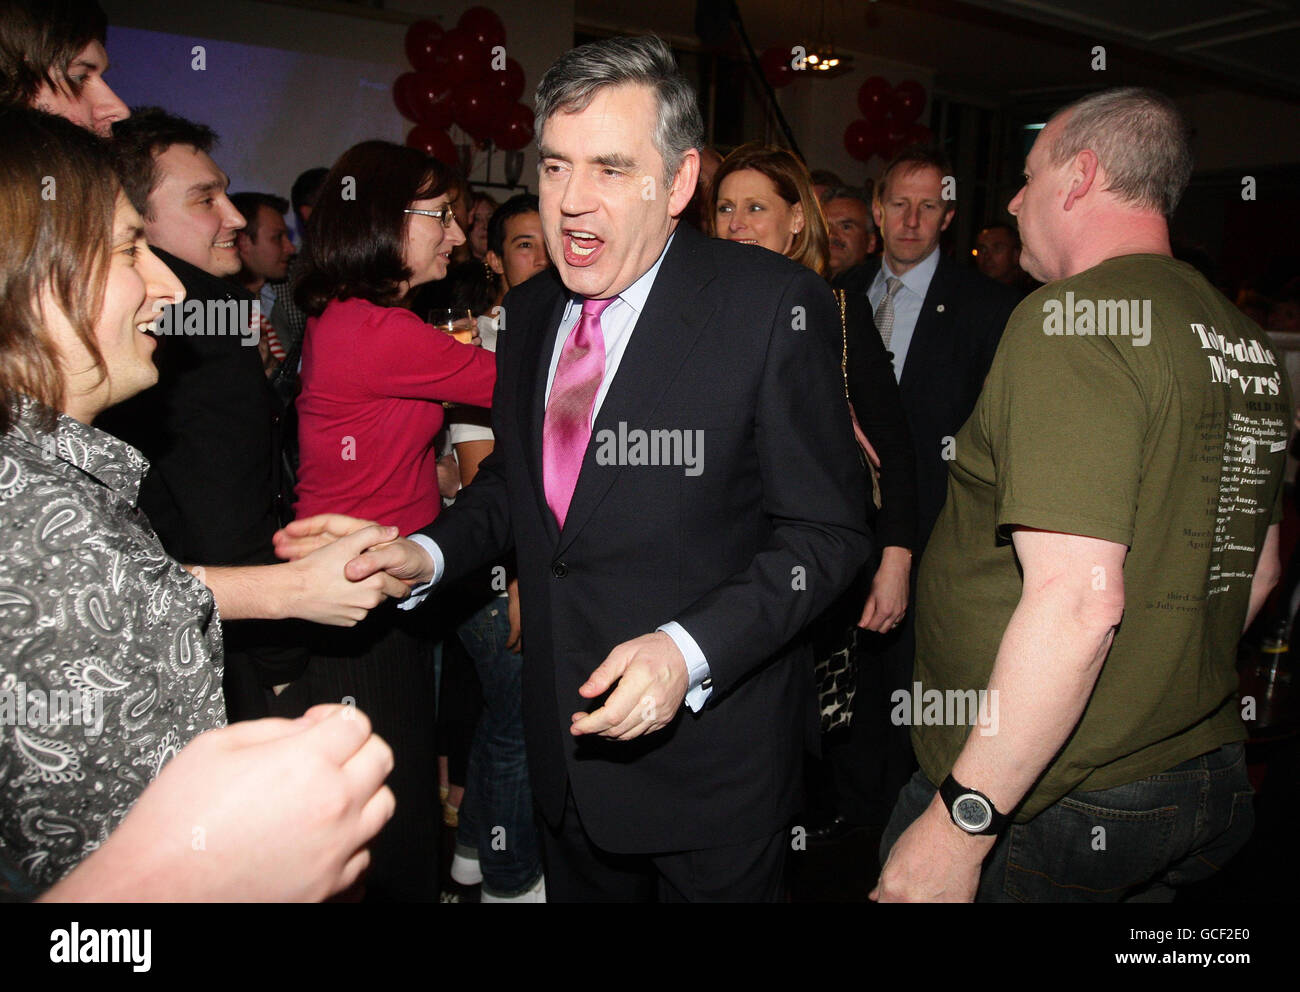 Prime Minister Gordon Brown meets Labour supporters as he arrives at the Kitty O'Shea pub in Manchester, following the live Election Debate between the party leaders. Stock Photo